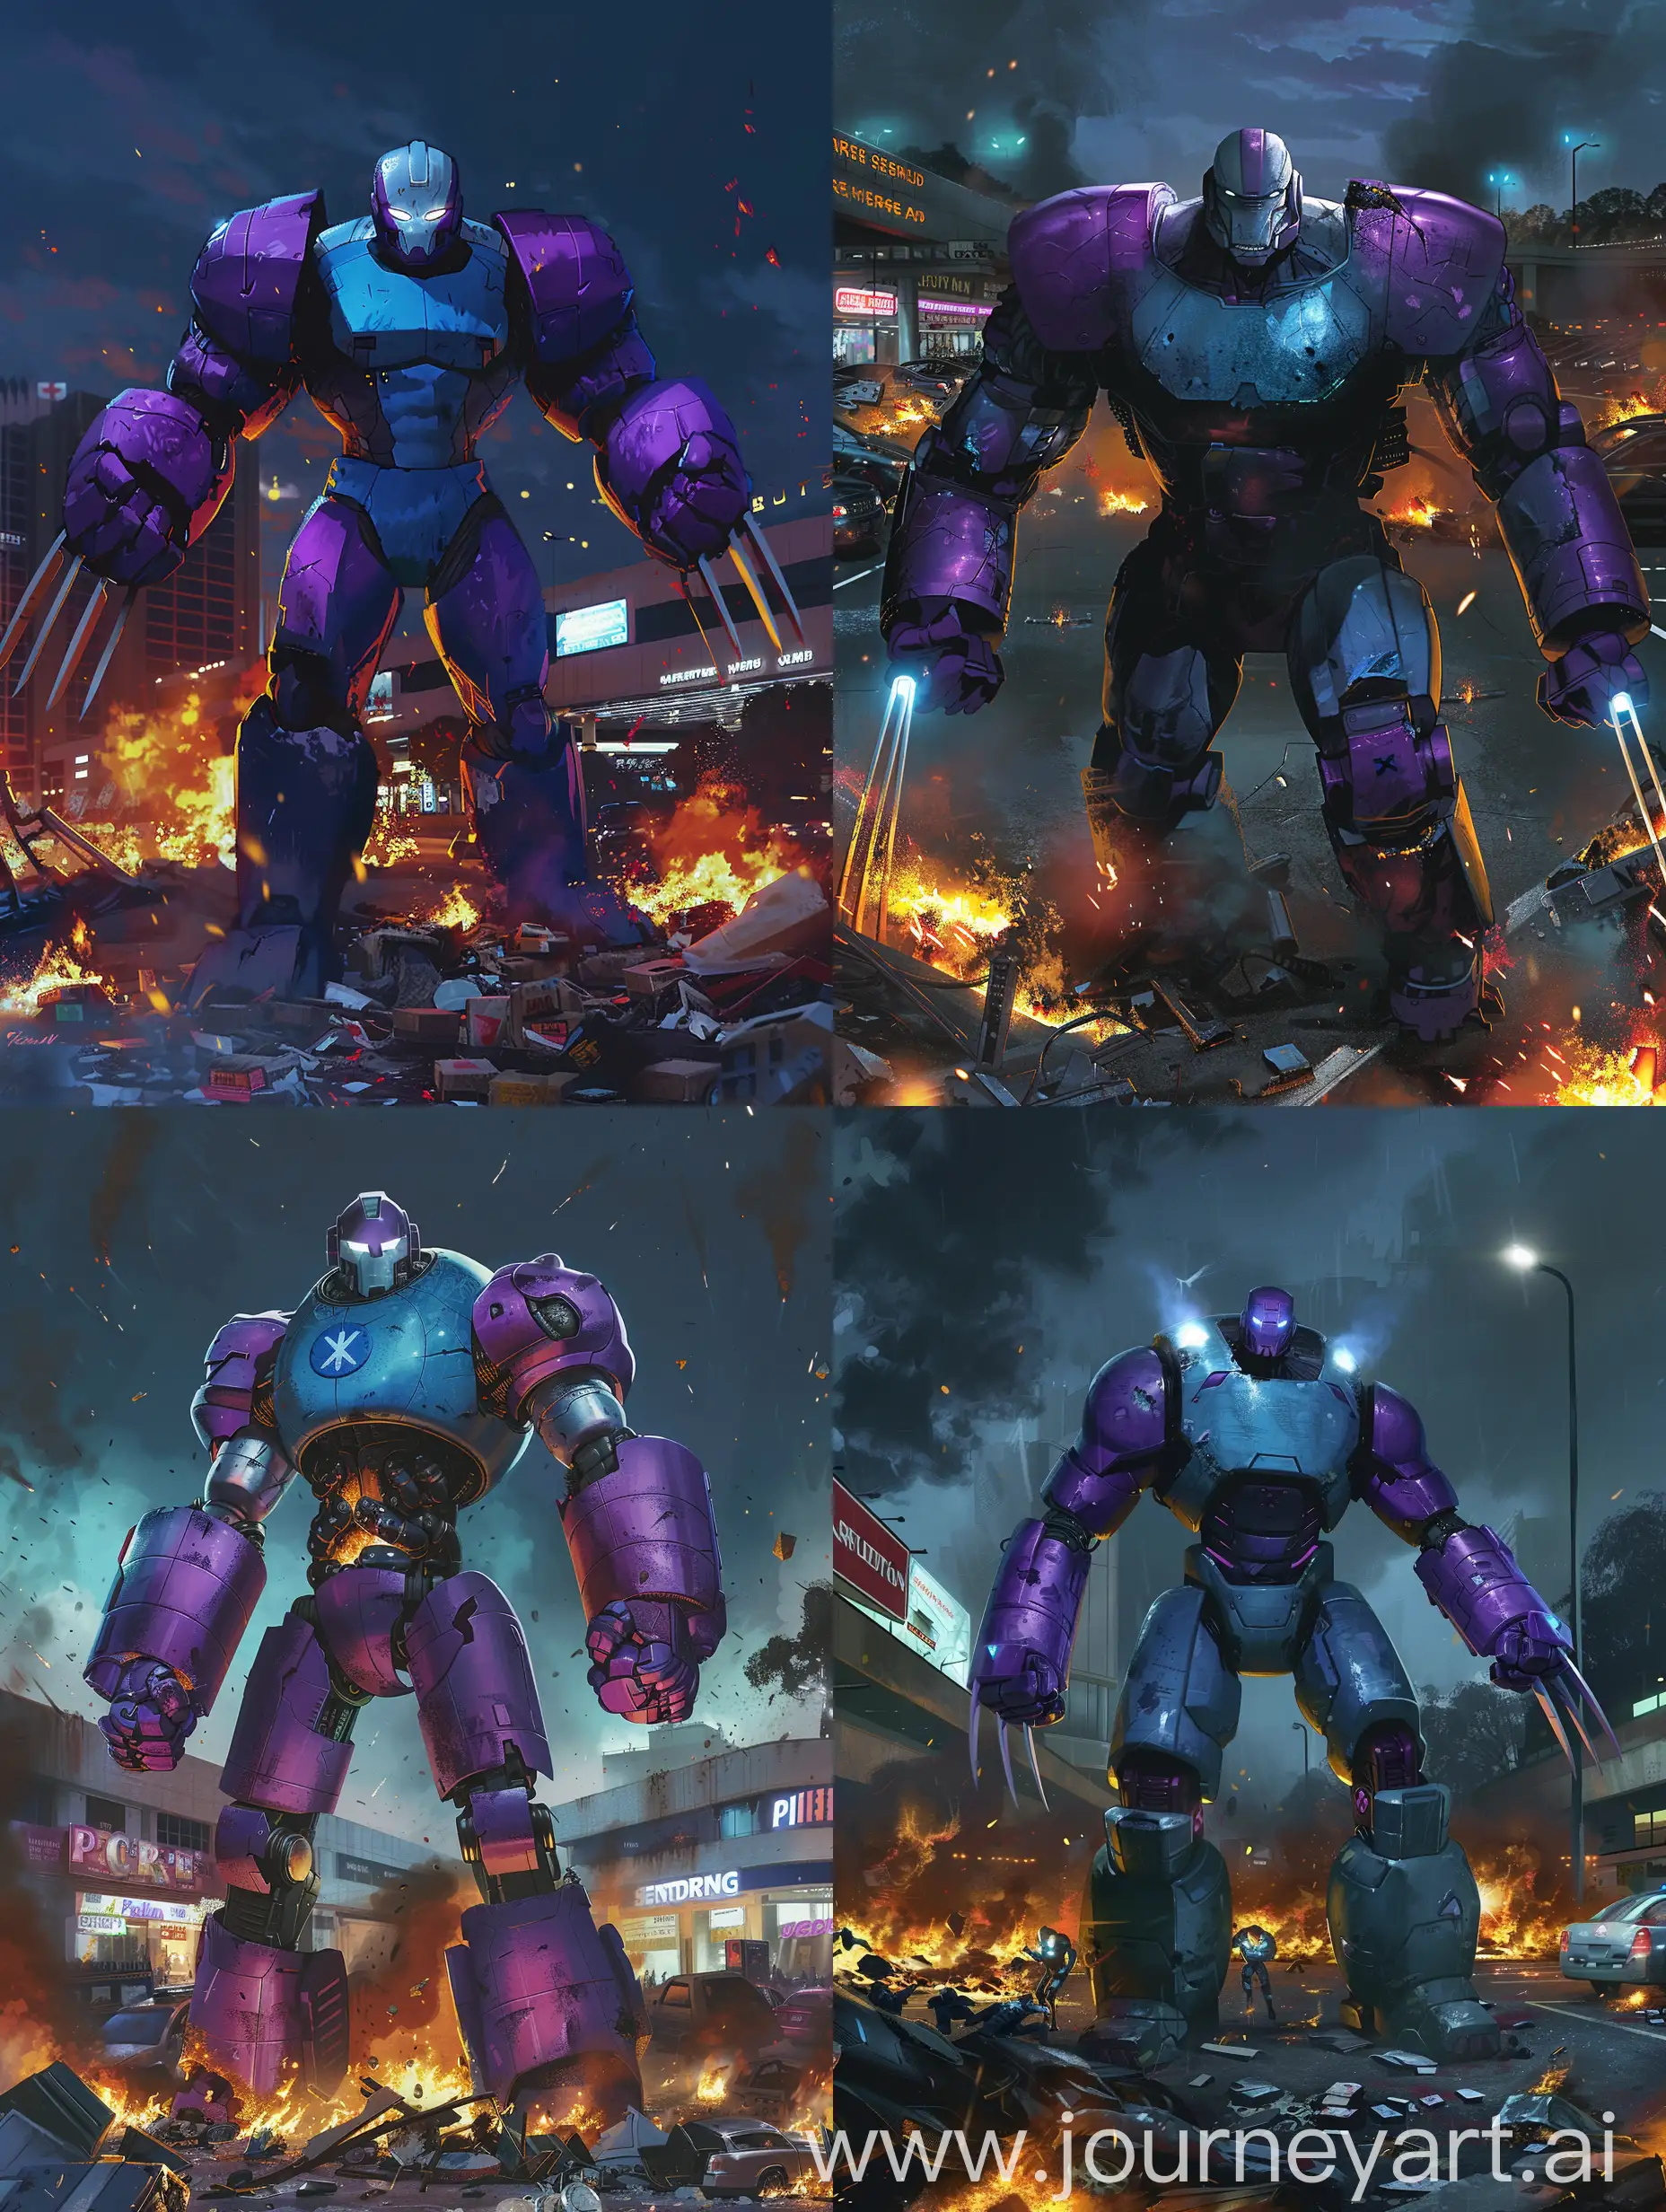 A towering Sentinel from X-Men with purple arms, a blue chest, and white eyes in a comic book art style, standing in a shopping mall parking lot at night amid fires and debris